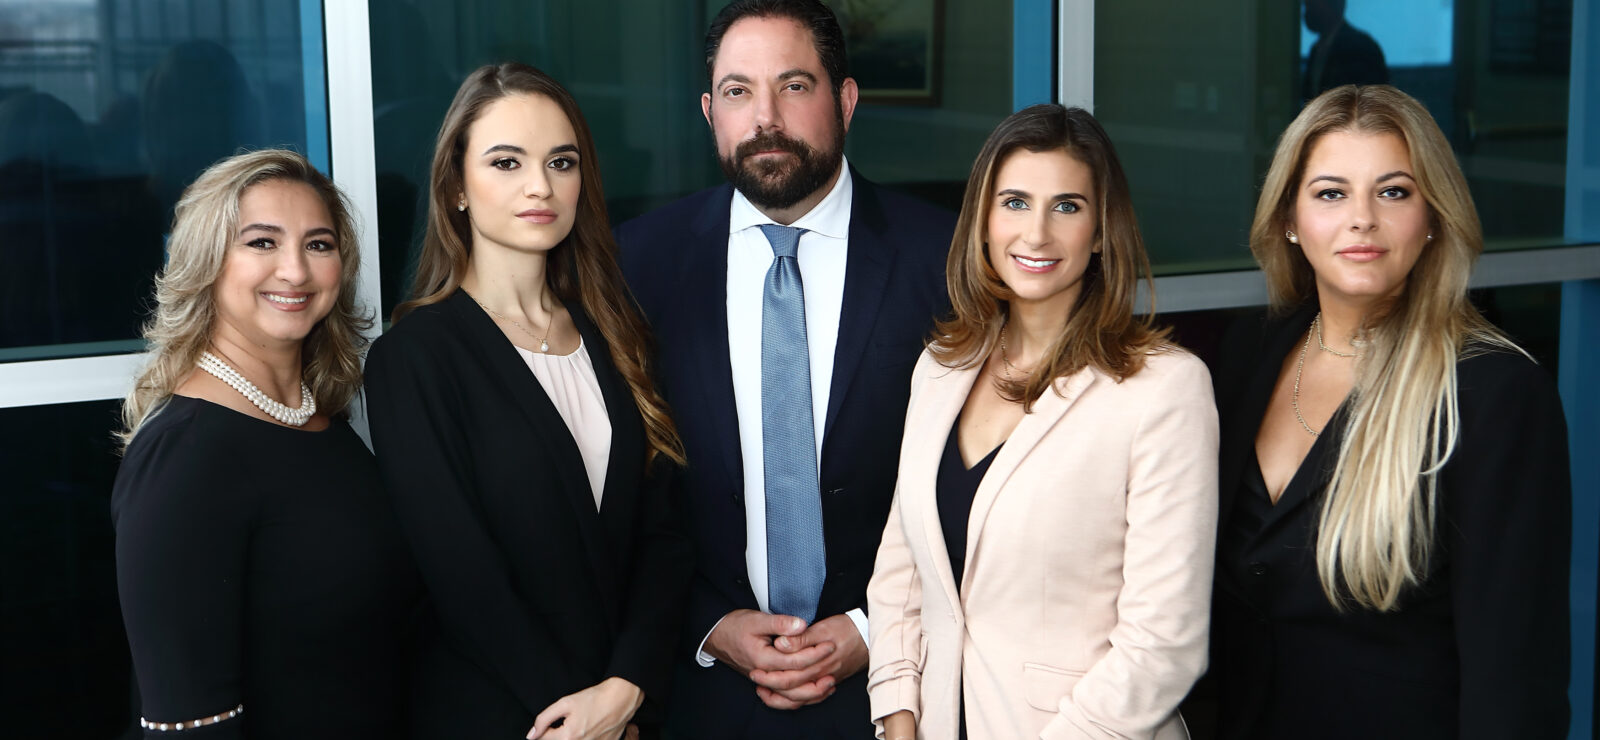 Best Criminal Defense and Justice Attorney Miami - Seitles & Law